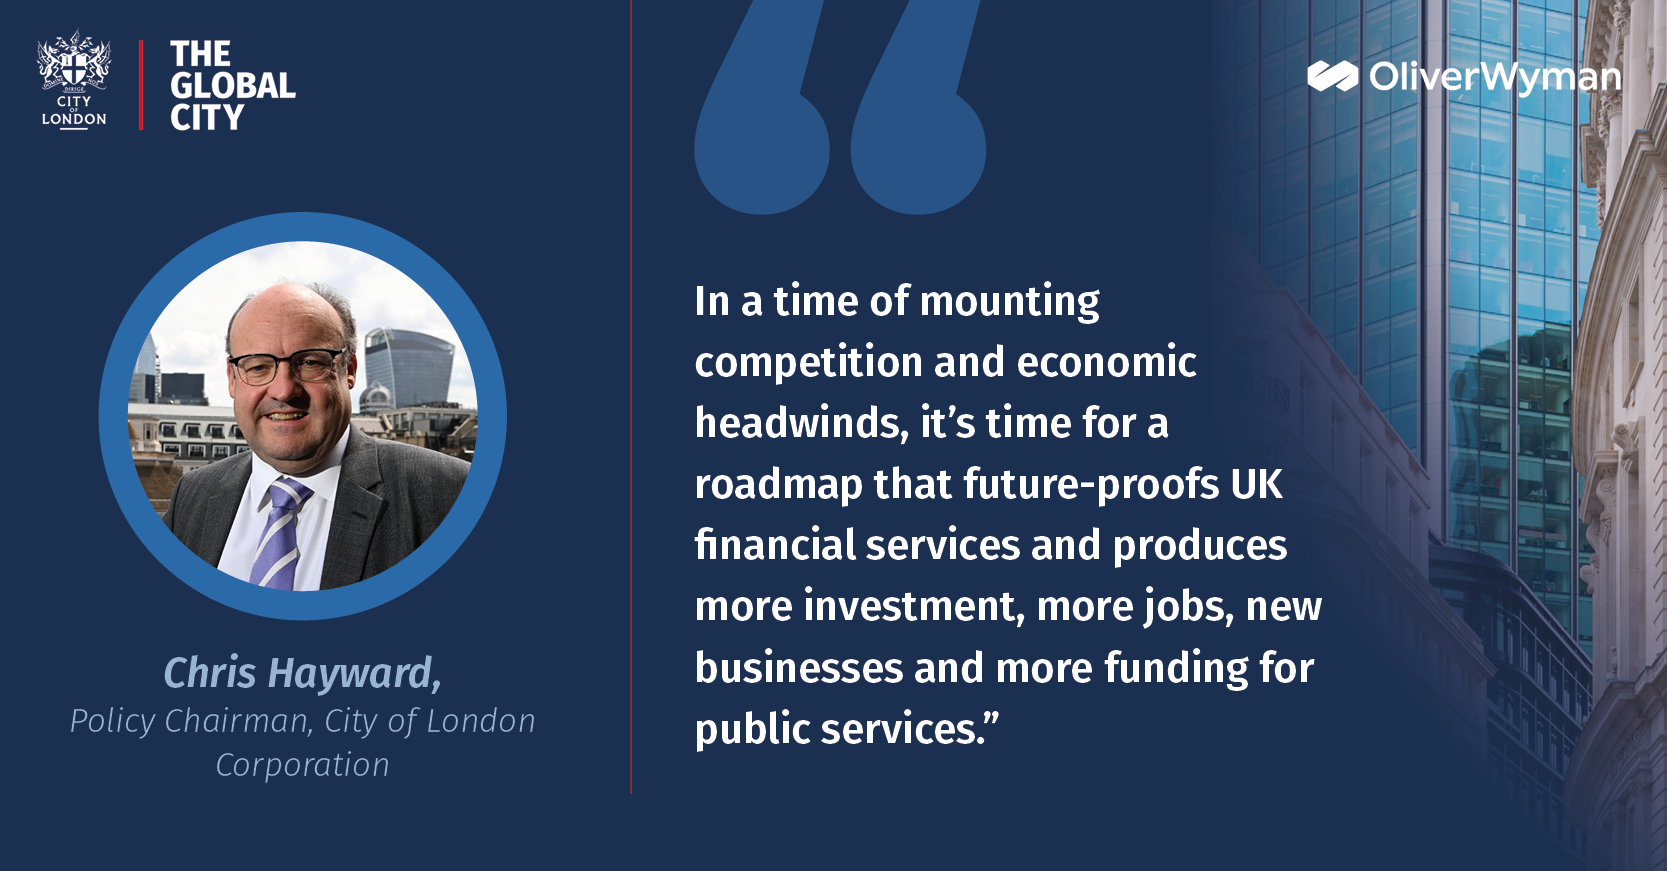 "In a time of mounting competition and economic headwinds, it’s time for a roadmap that future-proofs UK financial services and produces more investment, more jobs, new businesses and more funding for public services” Policy Chairman Chris Hayward, City of London Corporation